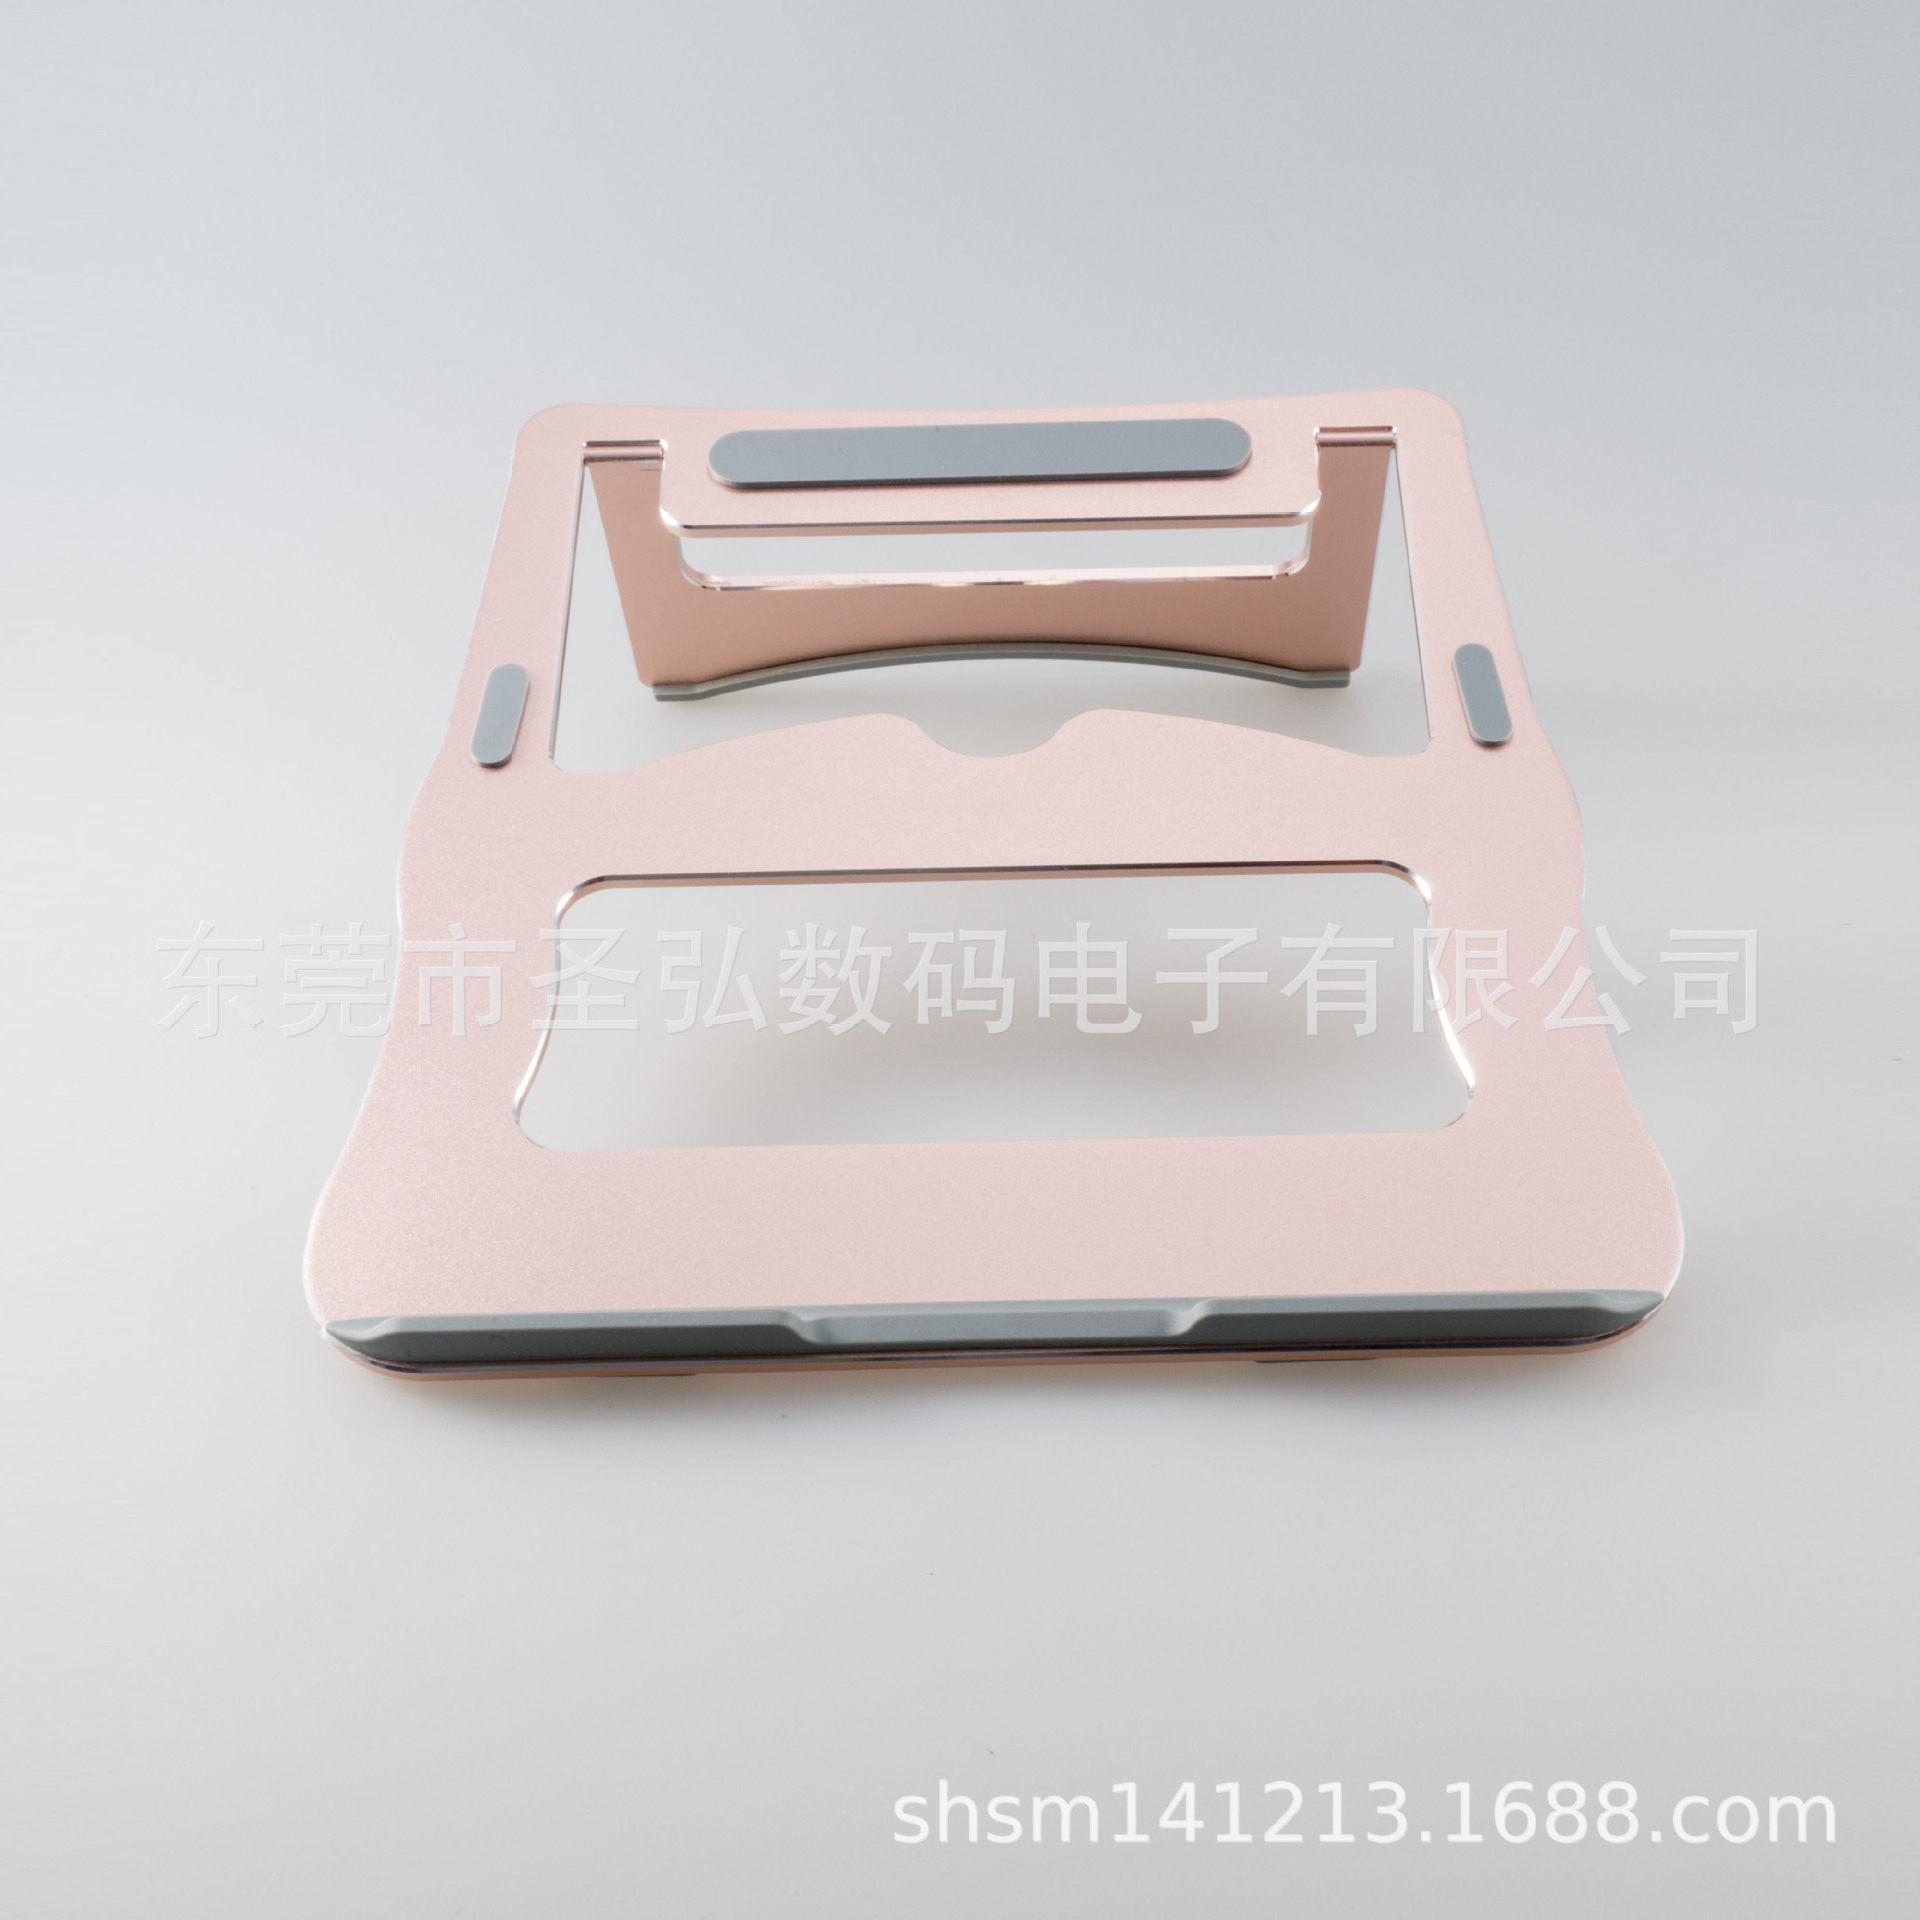 Notebook computer aluminium alloy Dissipate heat Bracket Adjustment angle fold wear-resisting to work in an office Bracket factory Direct selling